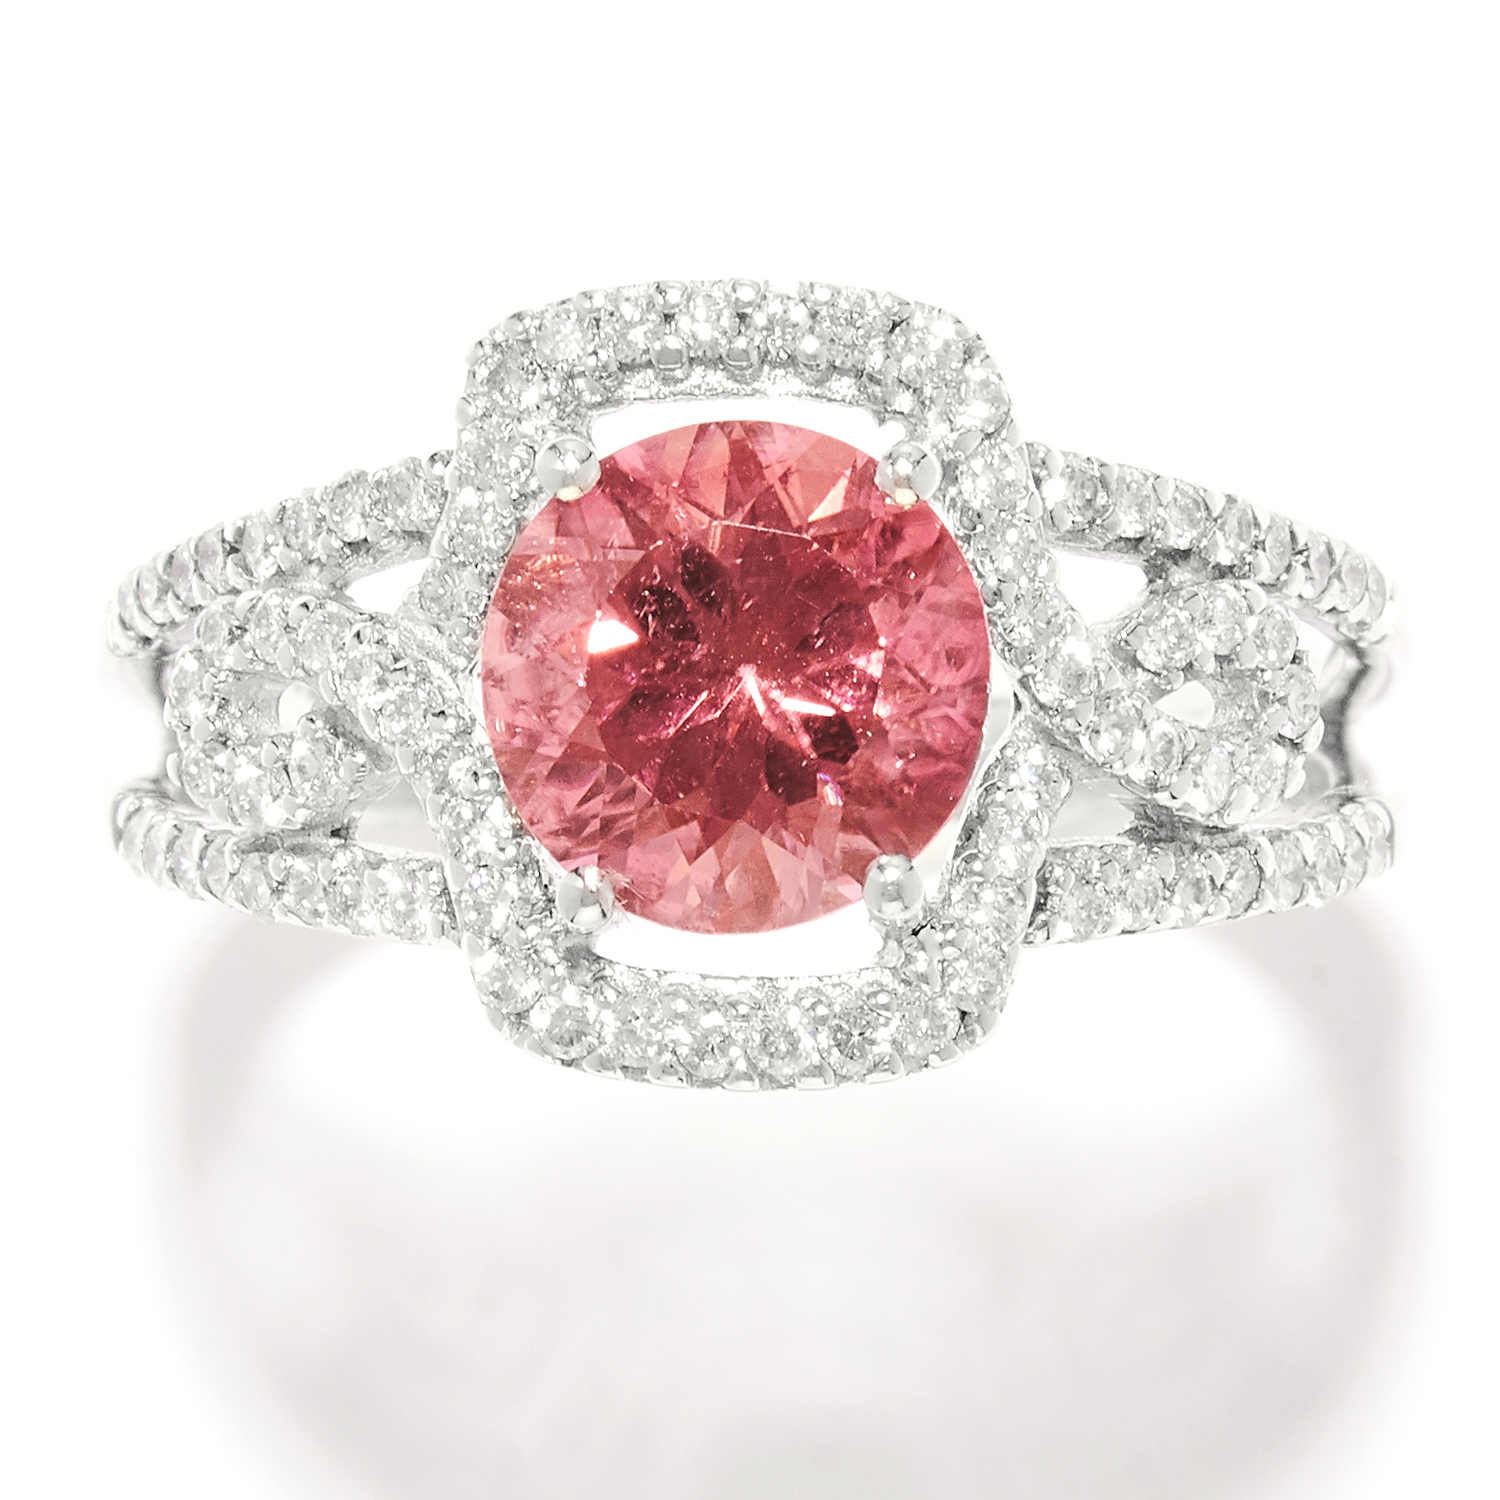 TOURMALINE AND DIAMOND DRESS RING in white gold, set with a round cut pink tourmaline and round